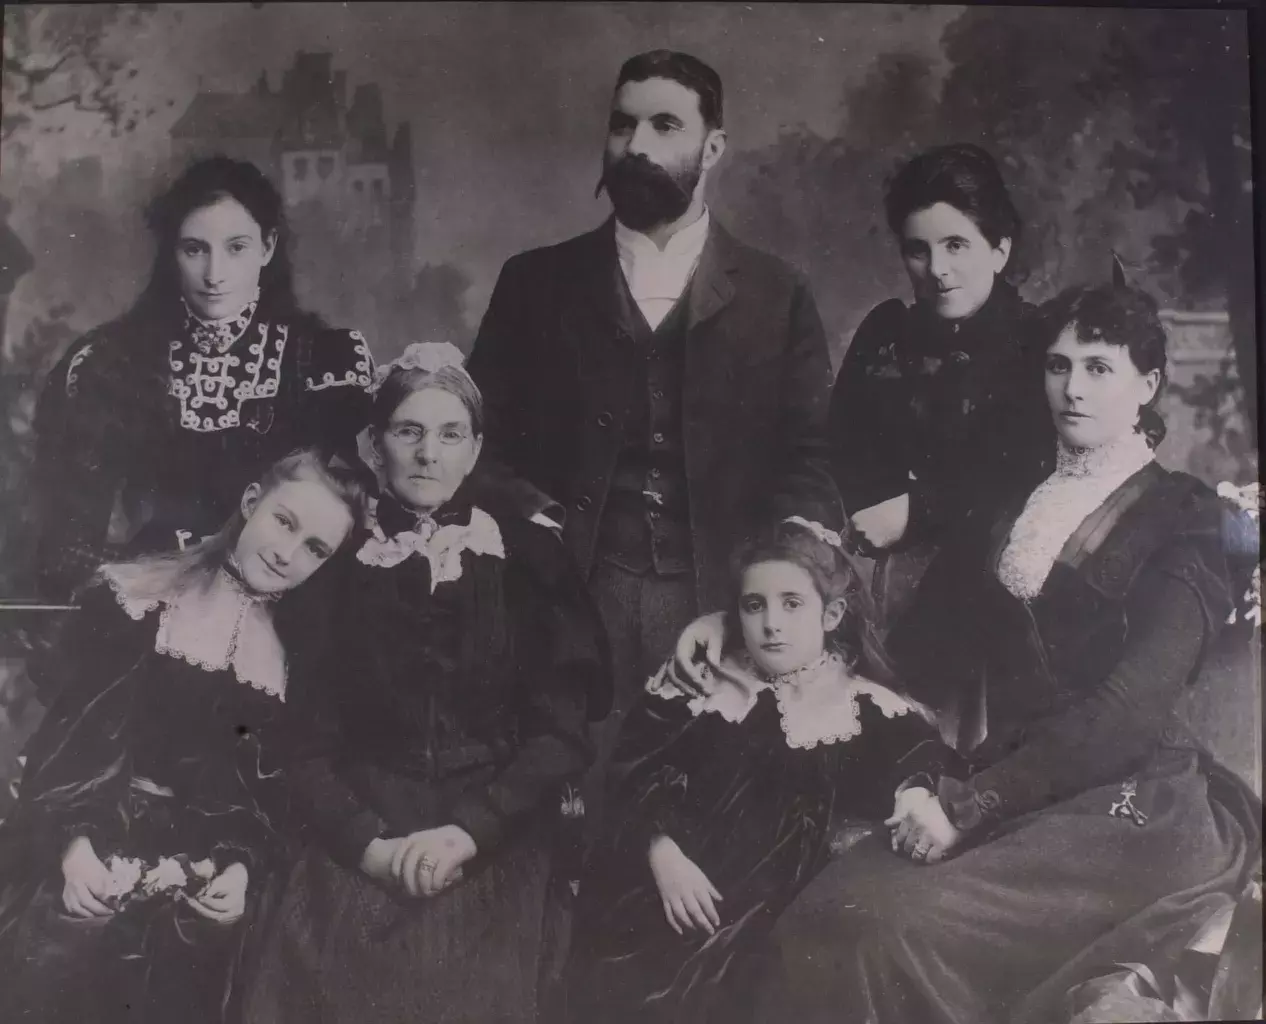 A black and white portrait of the Deakin family. 